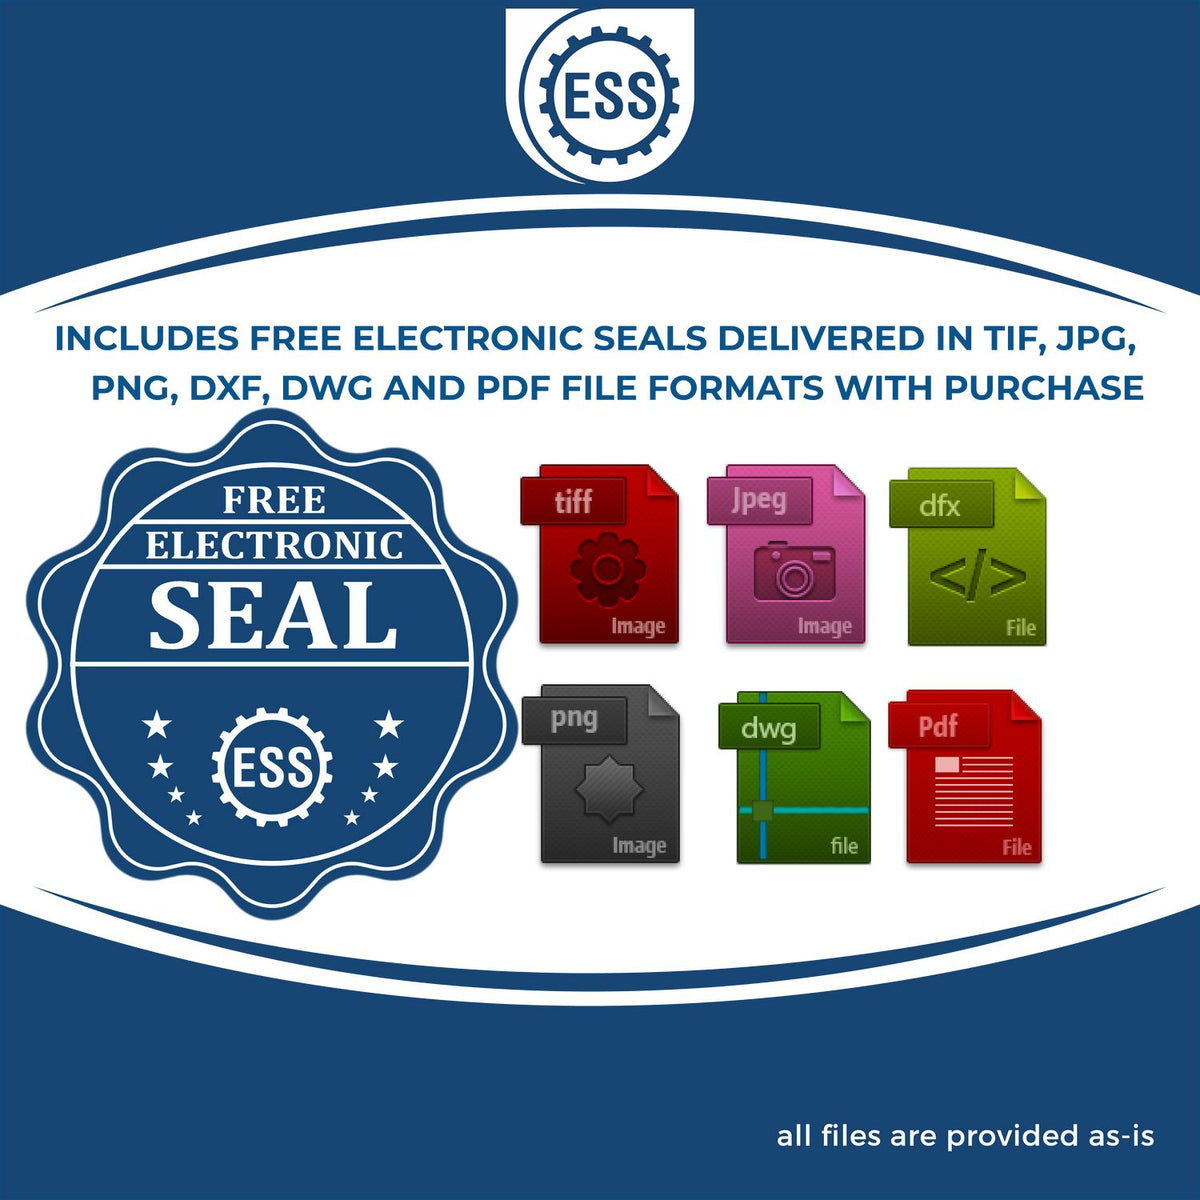 An infographic for the free electronic seal for the Gift Georgia Geologist Seal illustrating the different file type icons such as DXF, DWG, TIF, JPG and PNG.